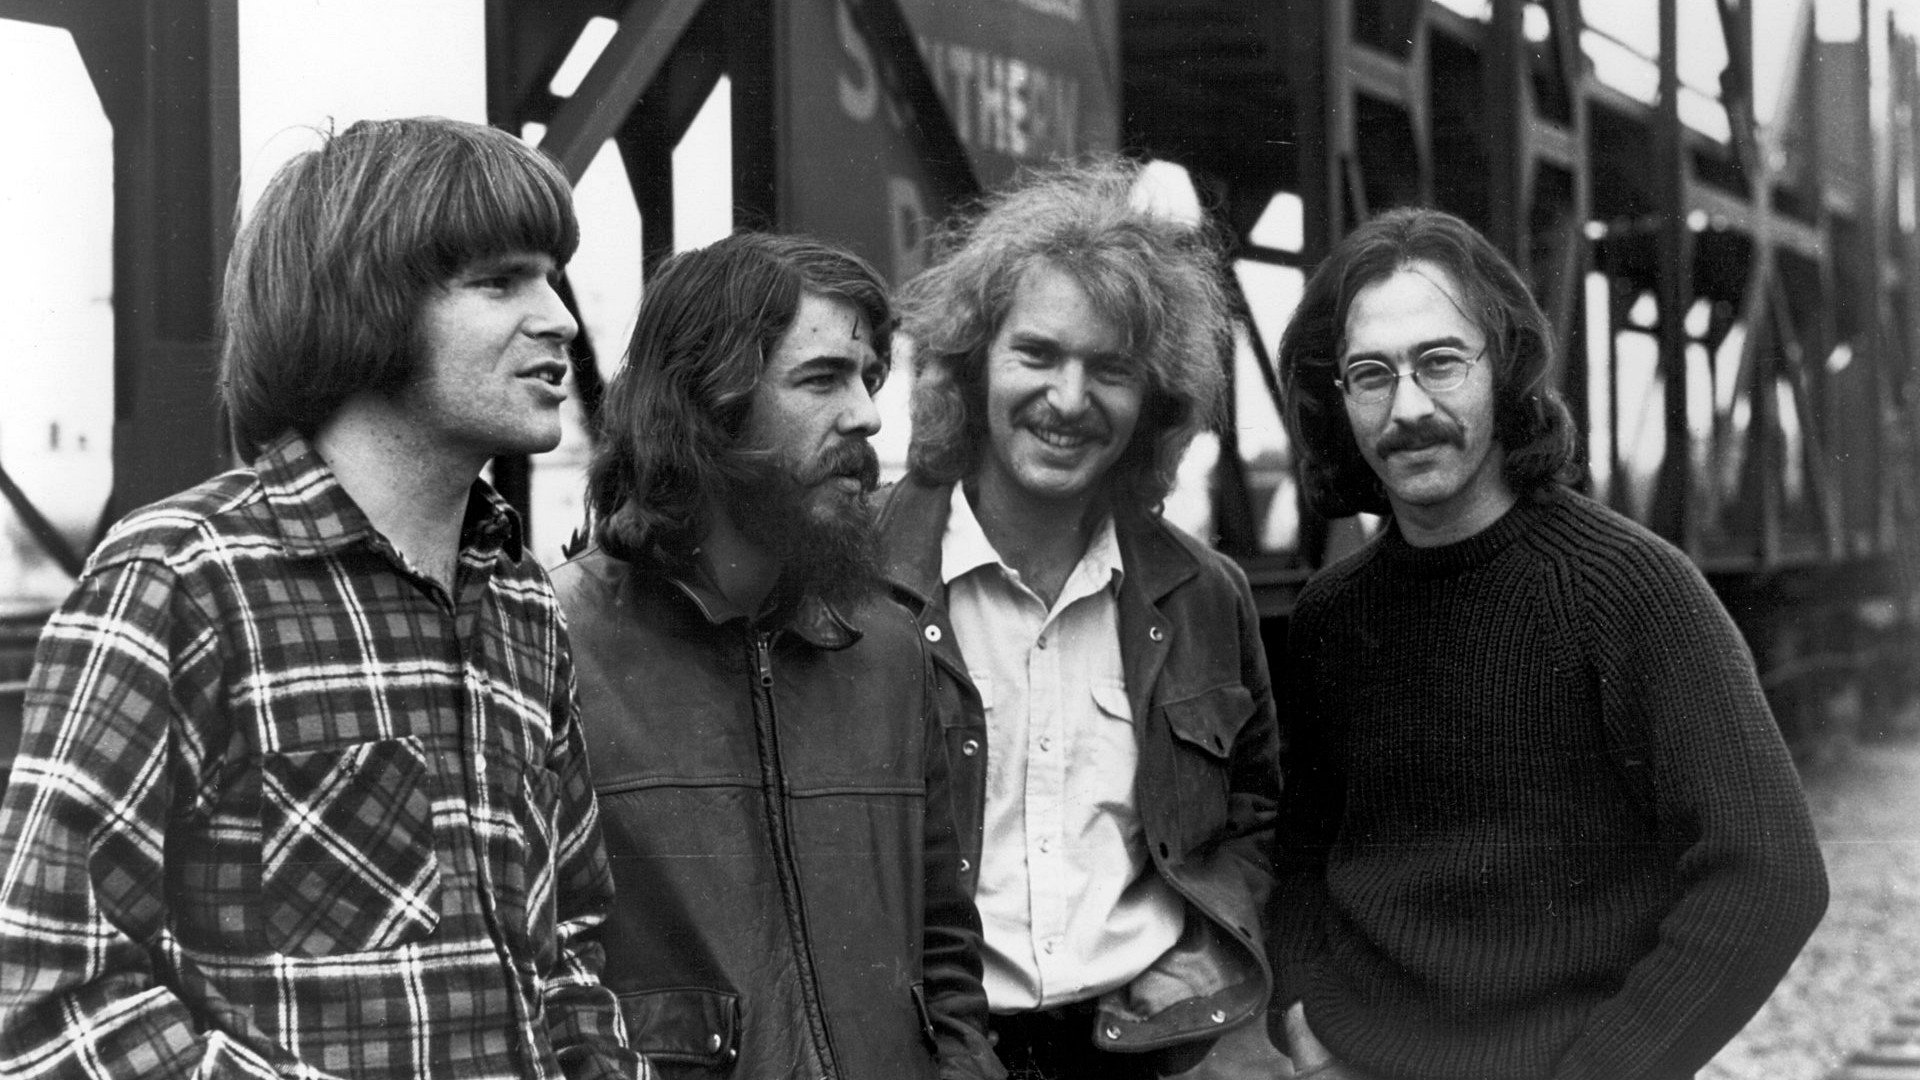 Download hd 1920x1080 Creedence Clearwater Revival computer wallpaper ID:20074 for free